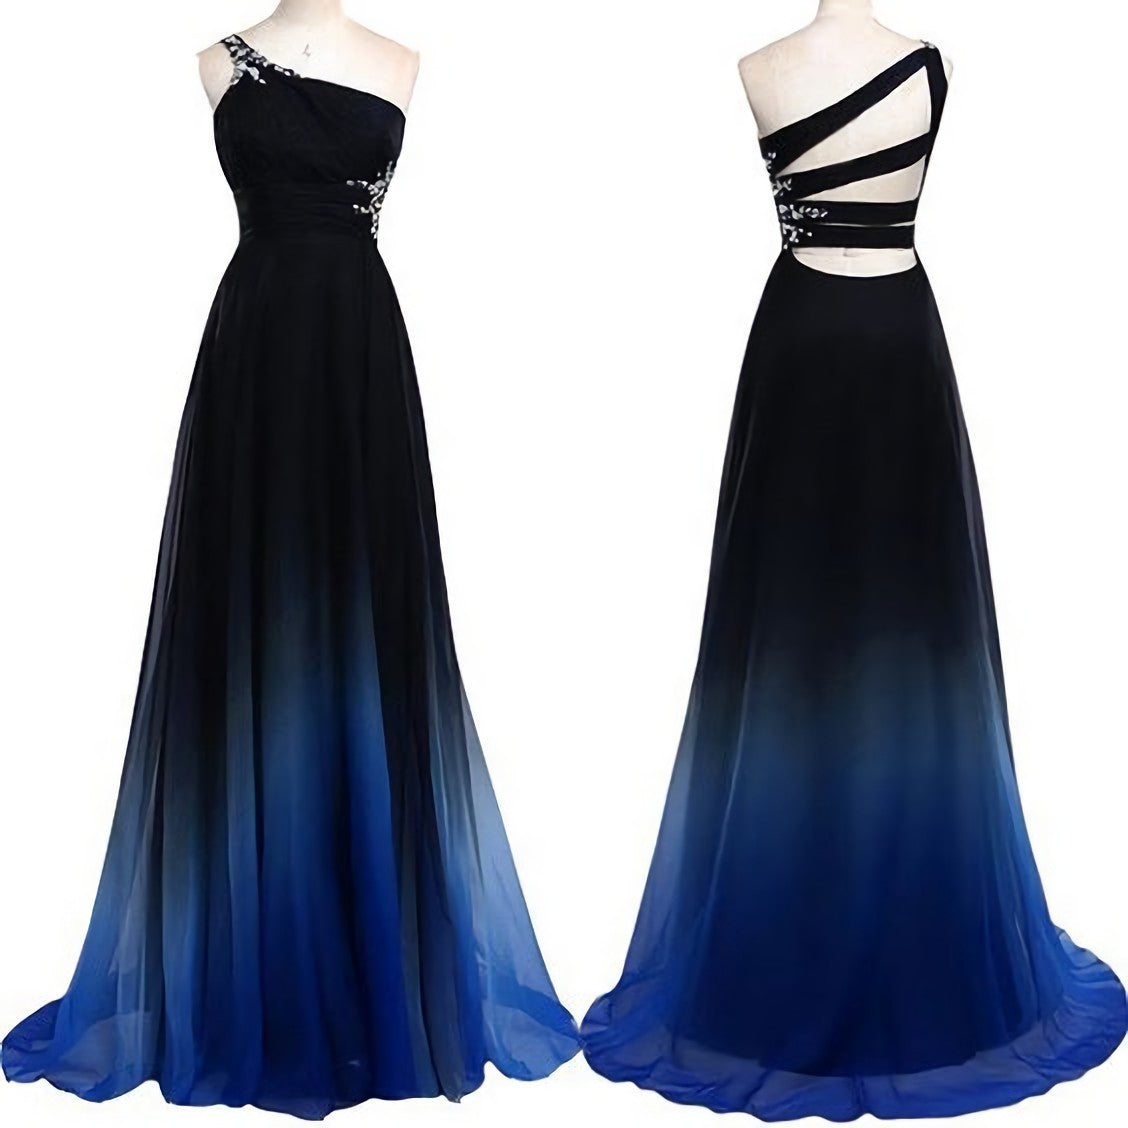 Wedding Dresses Spring, One Shoulder Navy Blue Royal Blue Ombre Gradient Color Chiffon Long Ombre For Sweet 16 Prom Dresses